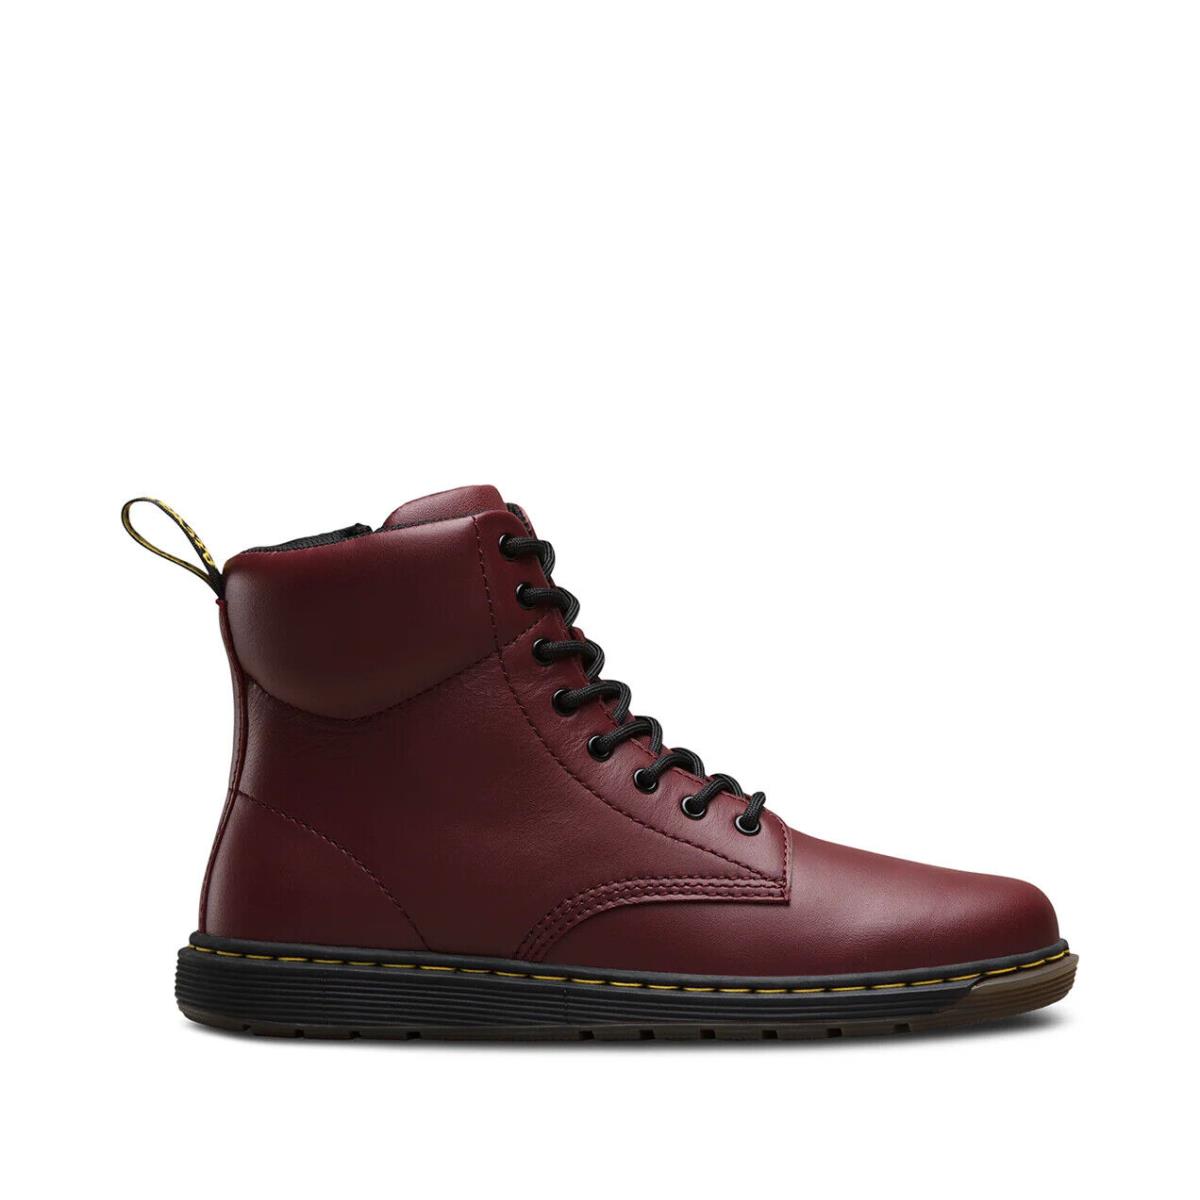 Dr Martens Junior Malky Cherry Red Leather Boots For Kids with a Zip